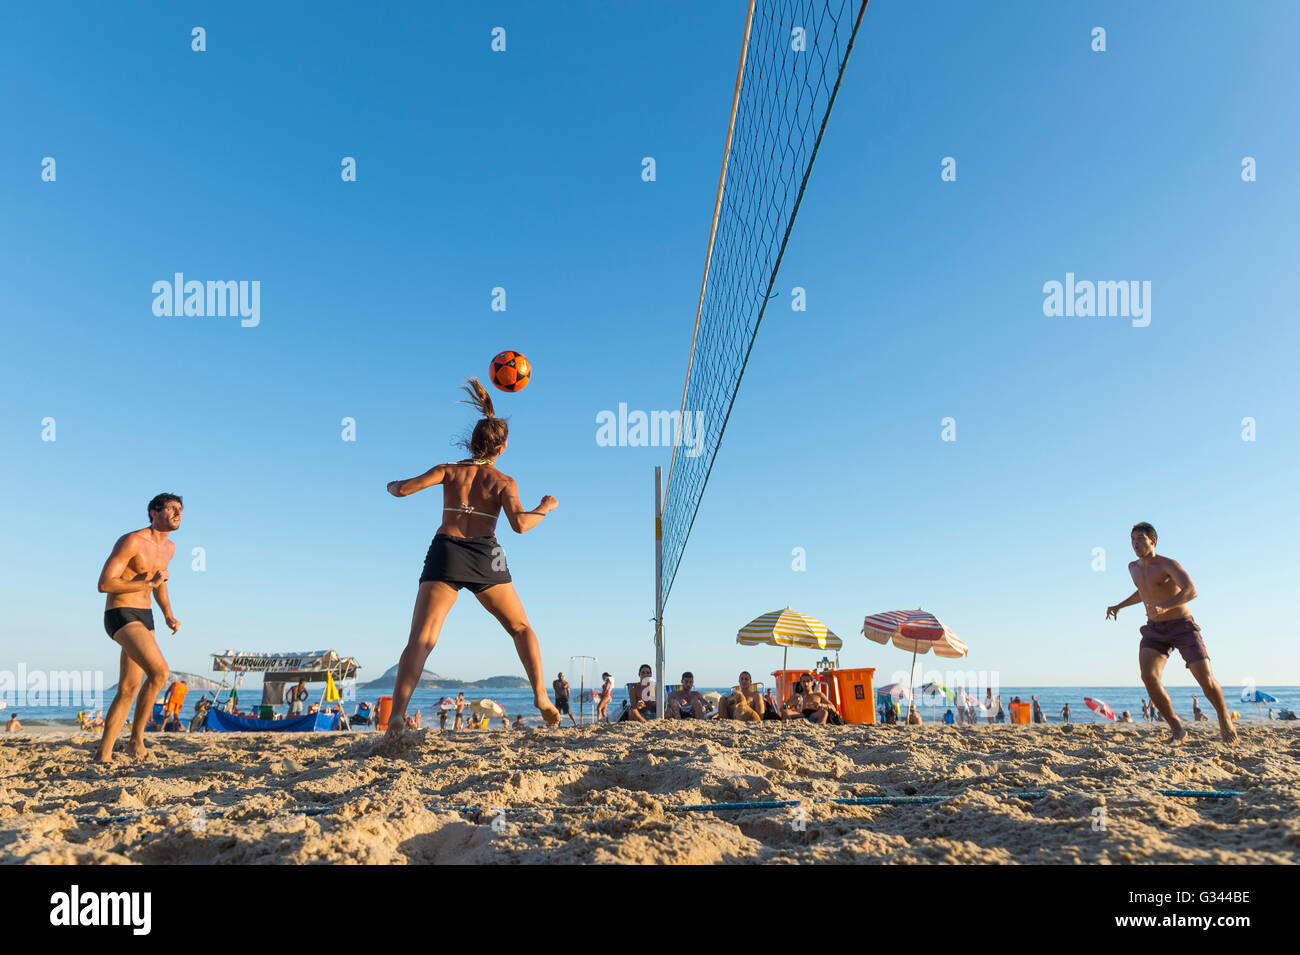 RIO DE JANEIRO - MARCH 17, 2016: Young Brazilian men and women play futevolei (footvolley), combining football and volleyball. Stock Photo